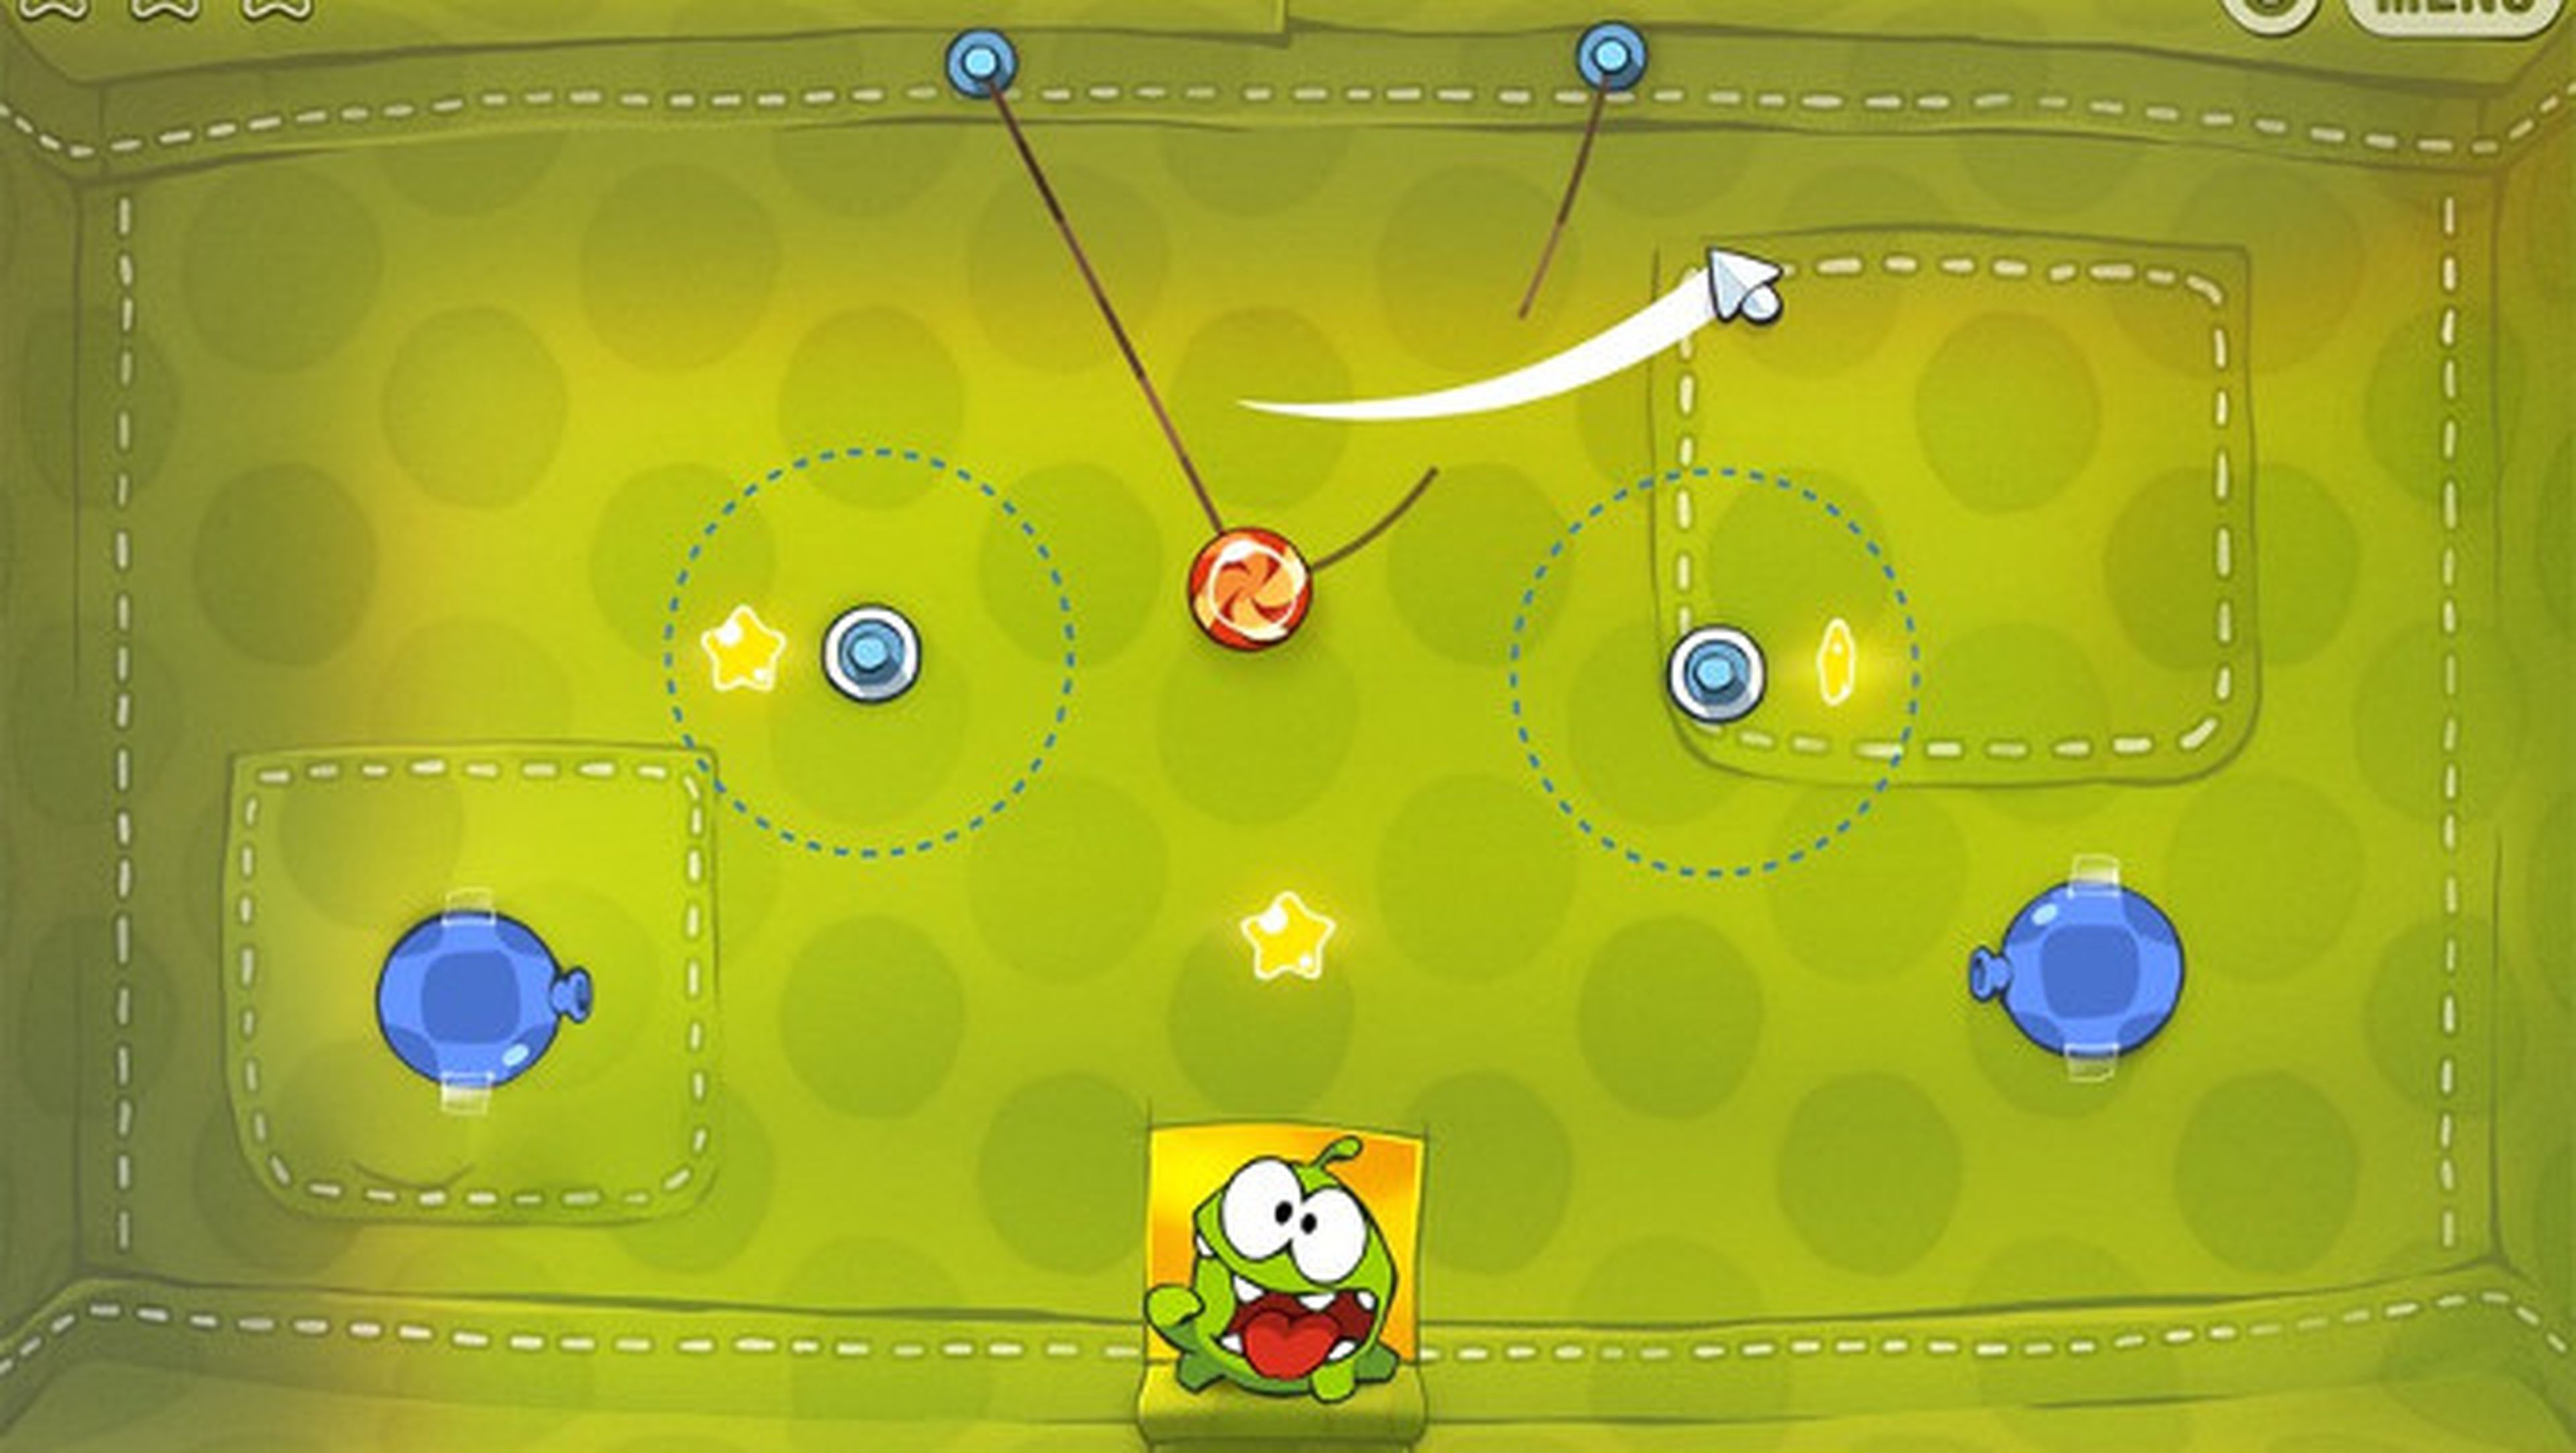 Cut the rope.